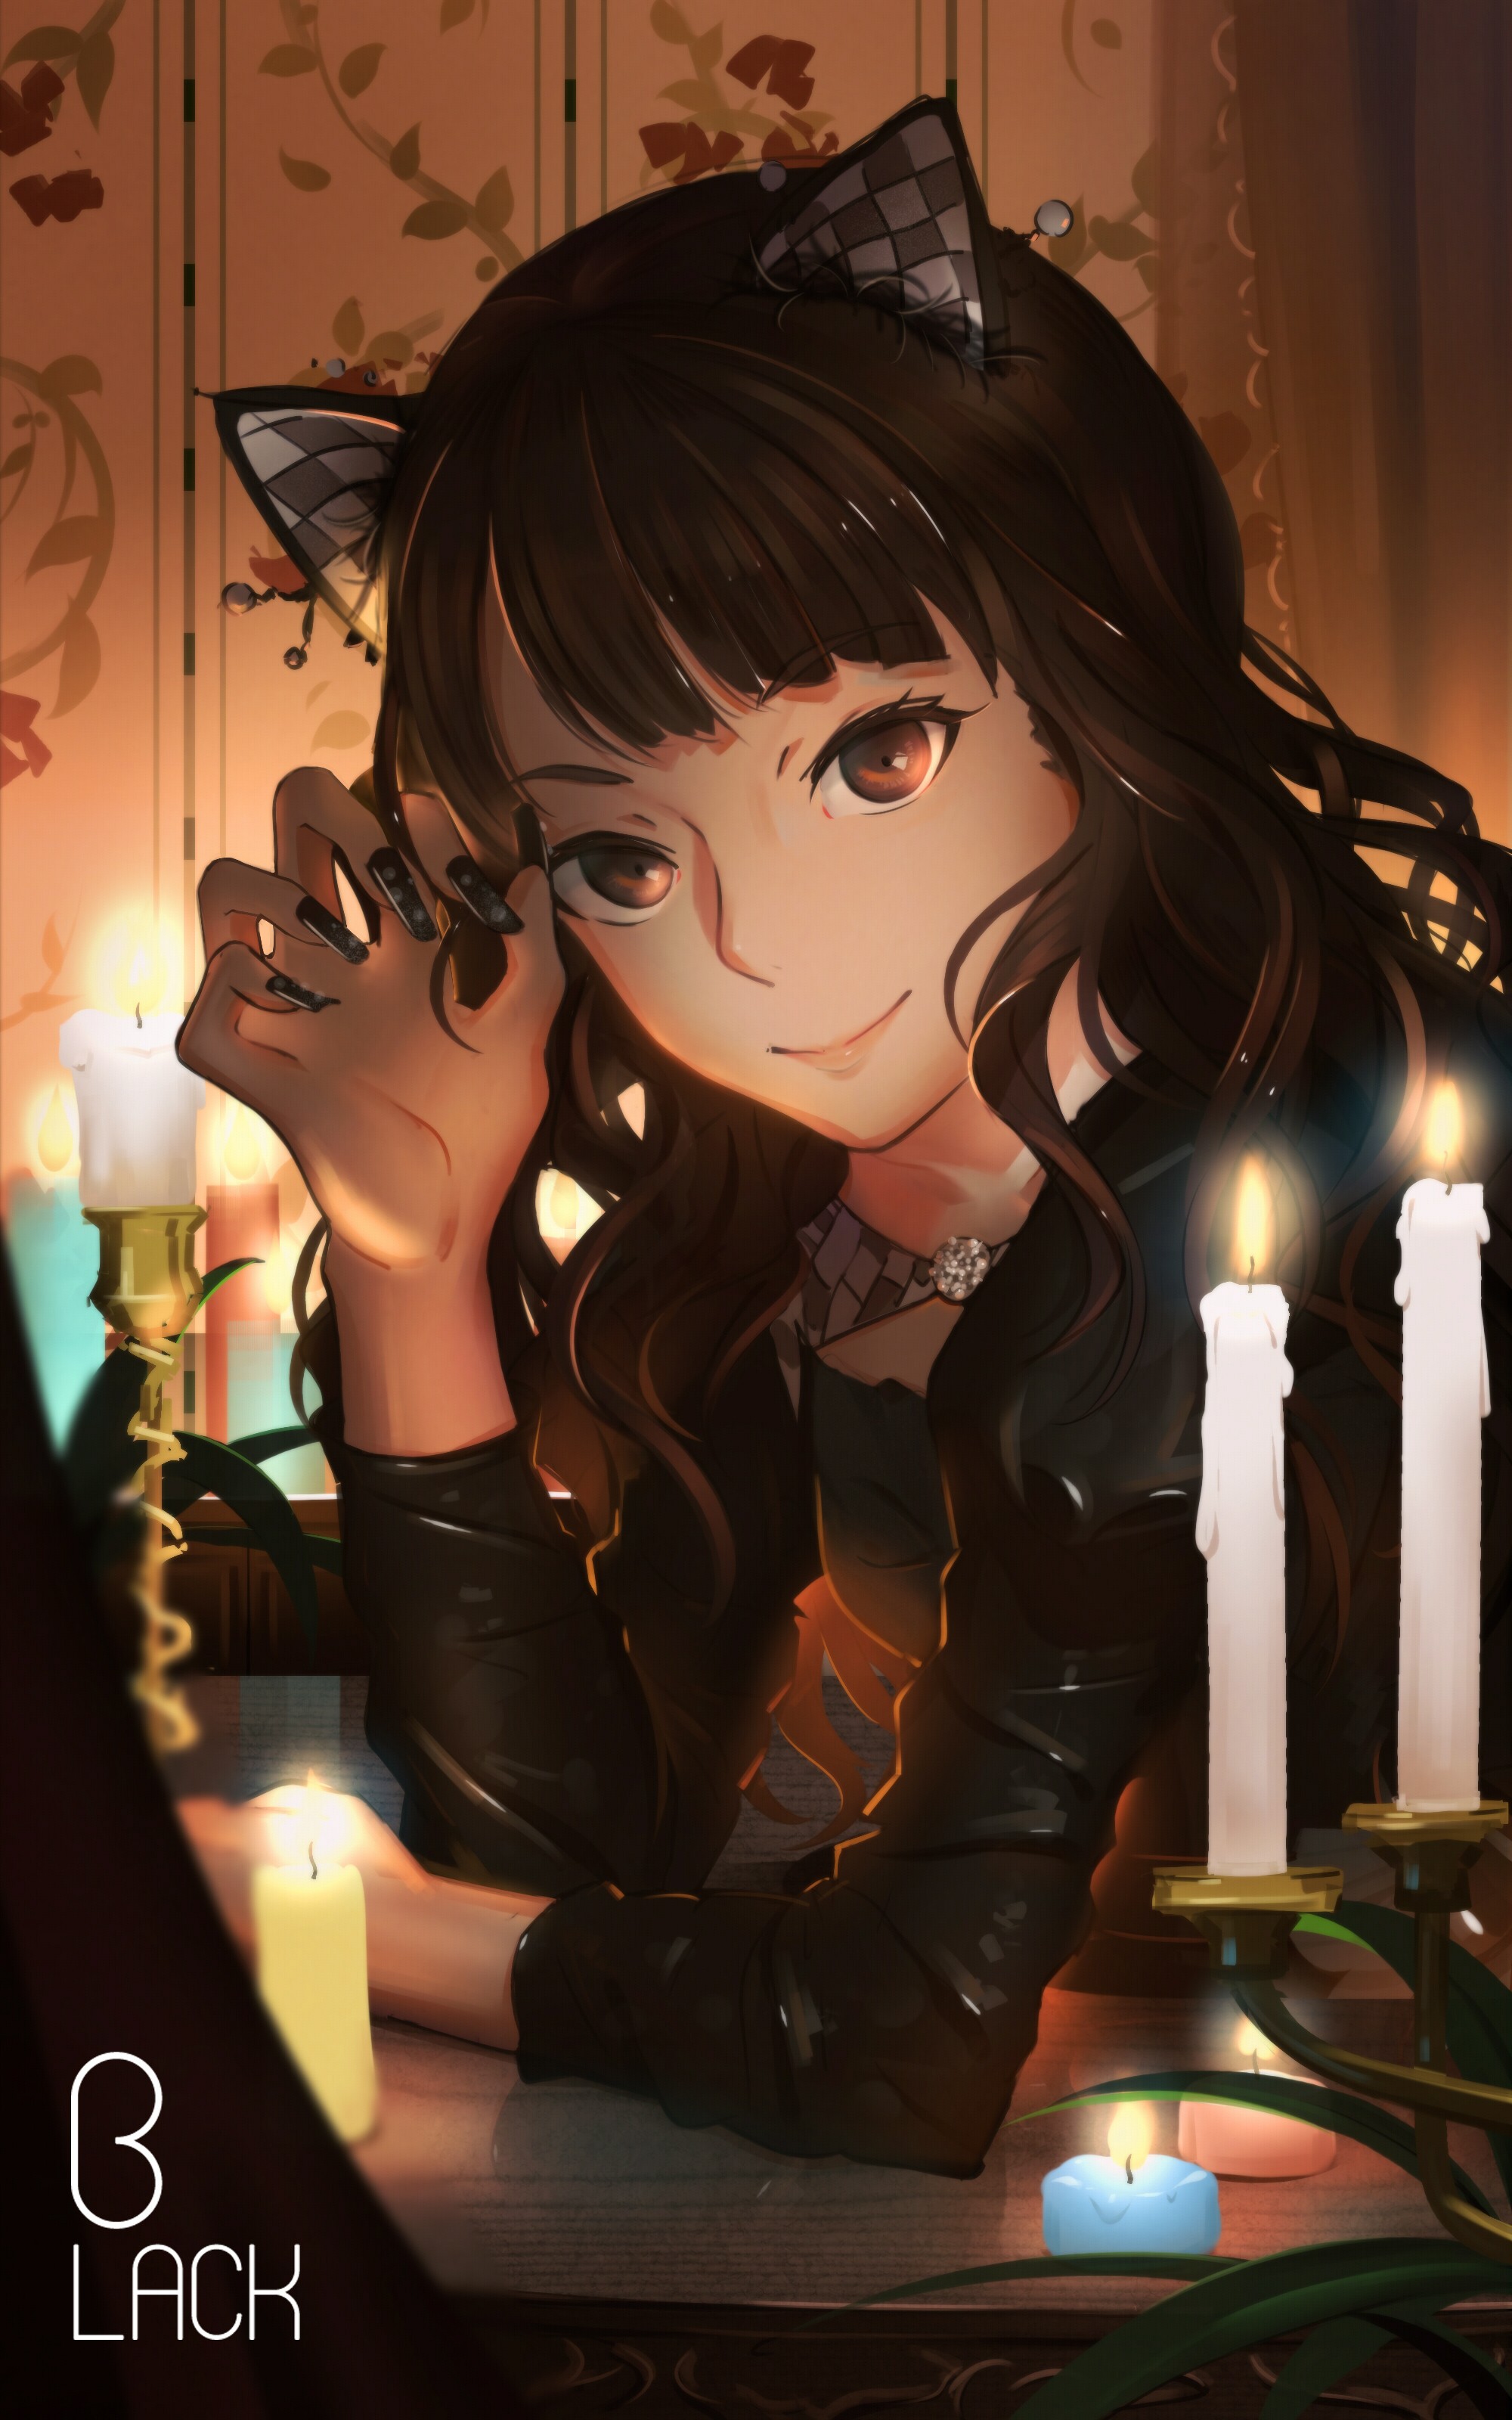 Anime 2000x3200 anime anime girls animal ears cat girl long hair long nails Pixiv dark hair smiling looking at viewer candles women face black nails painted nails